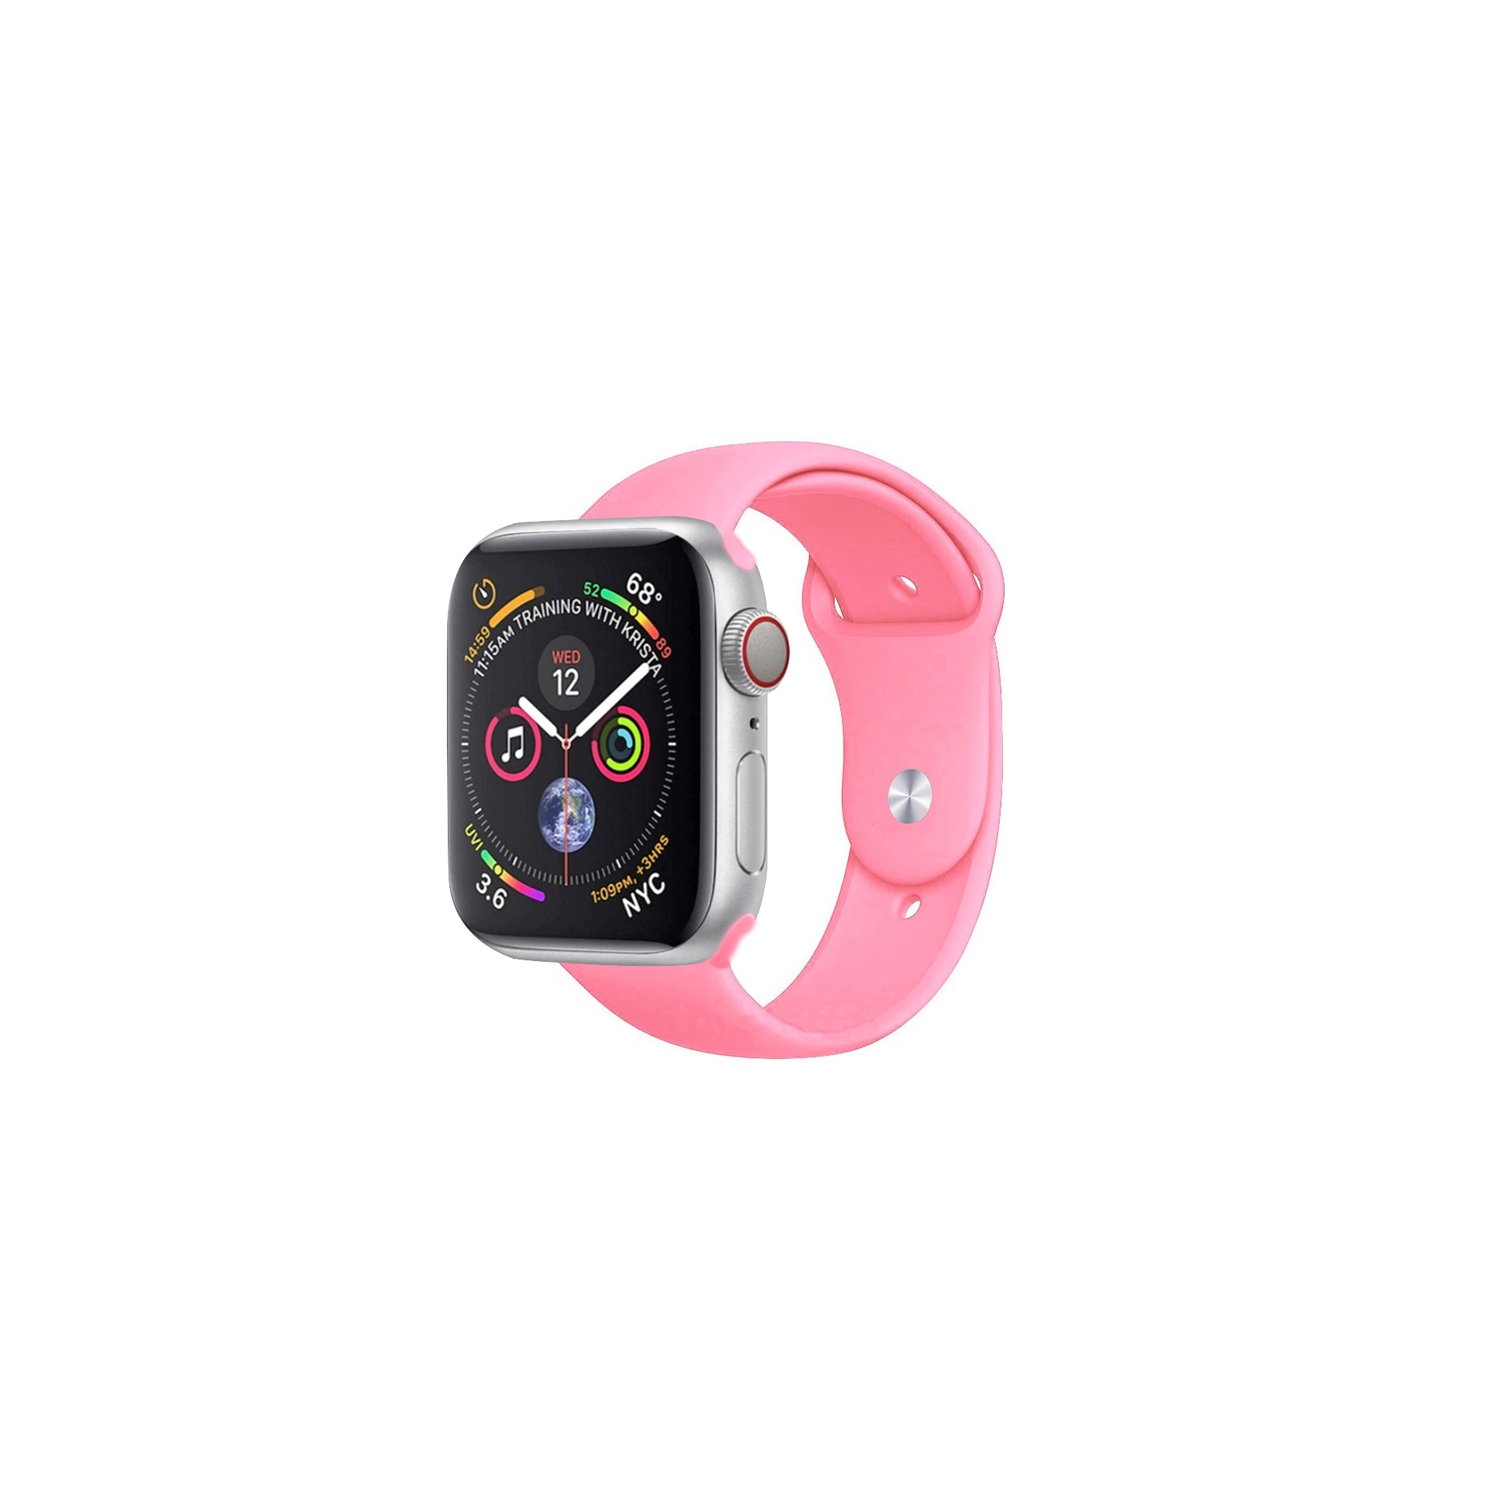 Watch Strap Silicone Sports Band Bracelet M/L Size For Apple iWatch Series 42mm/44mm - Light Pink